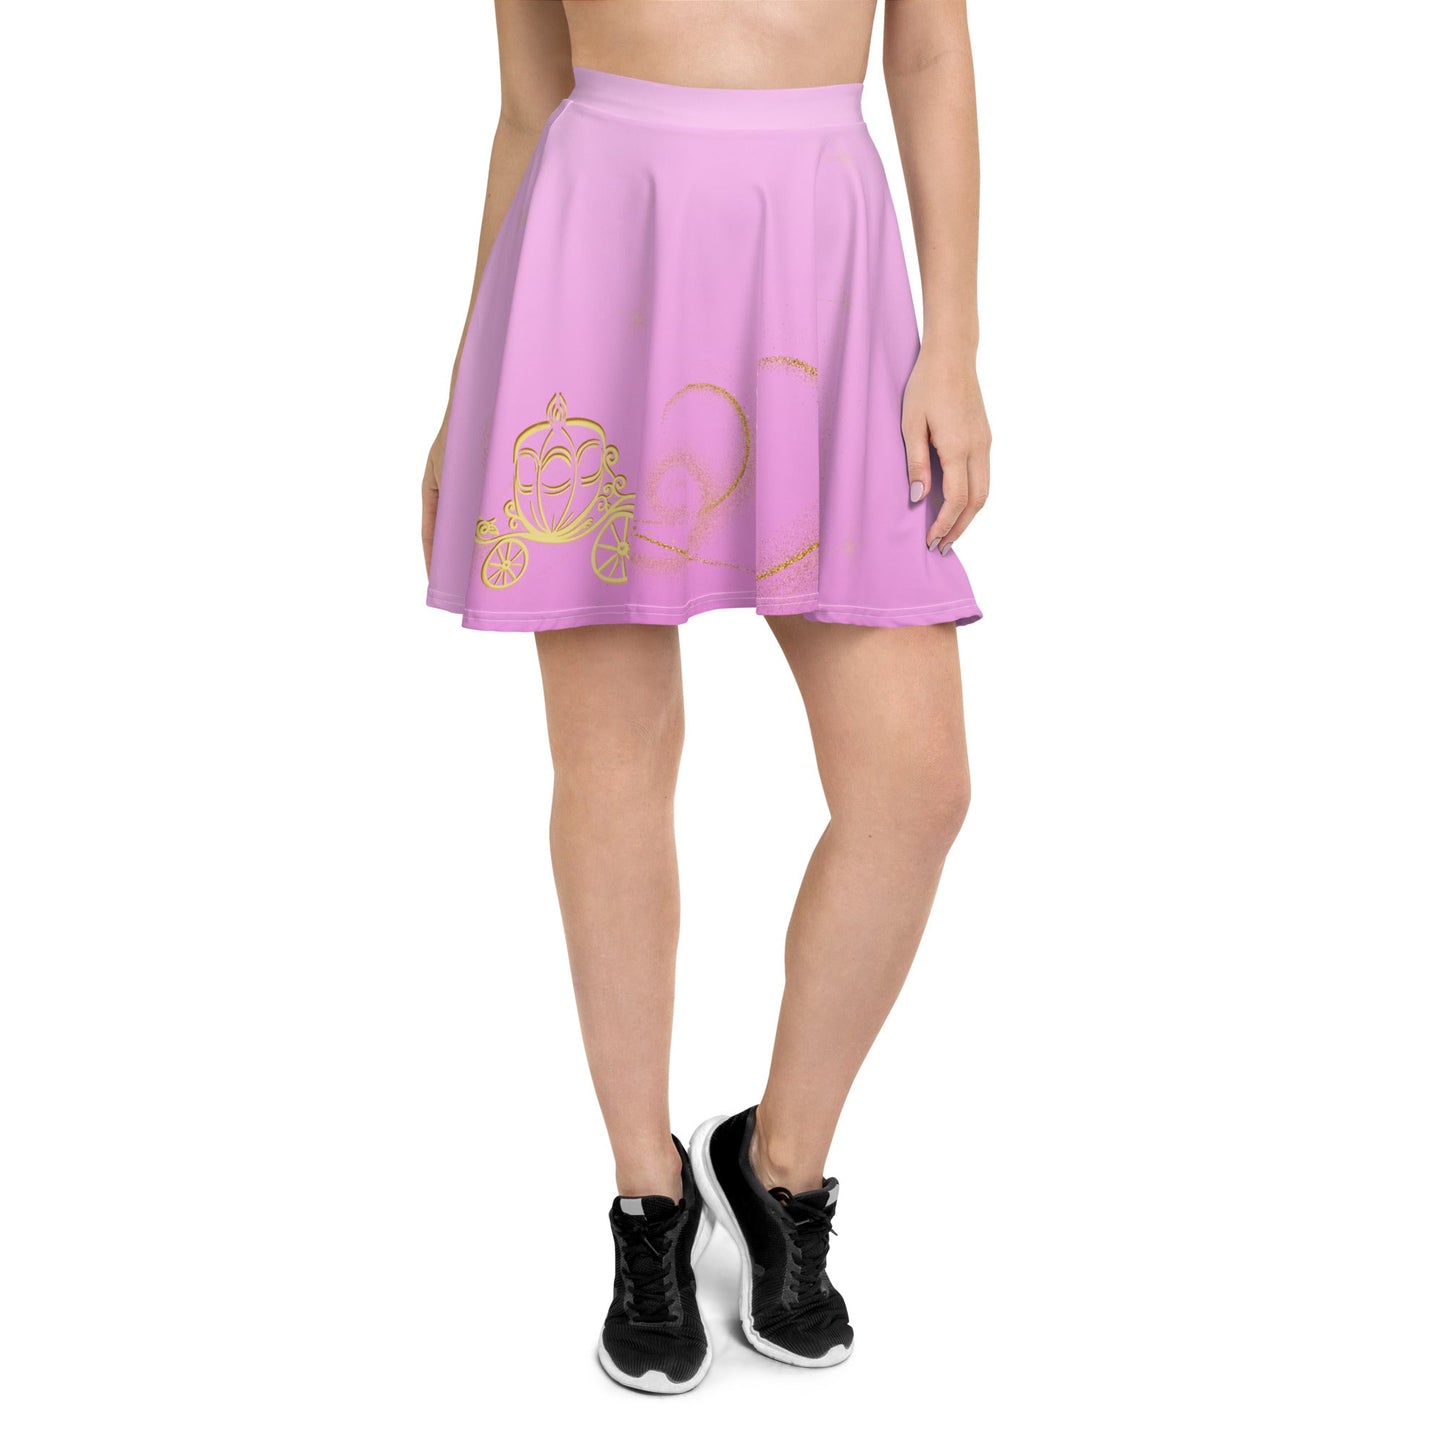 Pink Magical Carriage Skater Skirt adult princess dressadult skater skirtSkater SkirtWrong Lever Clothing